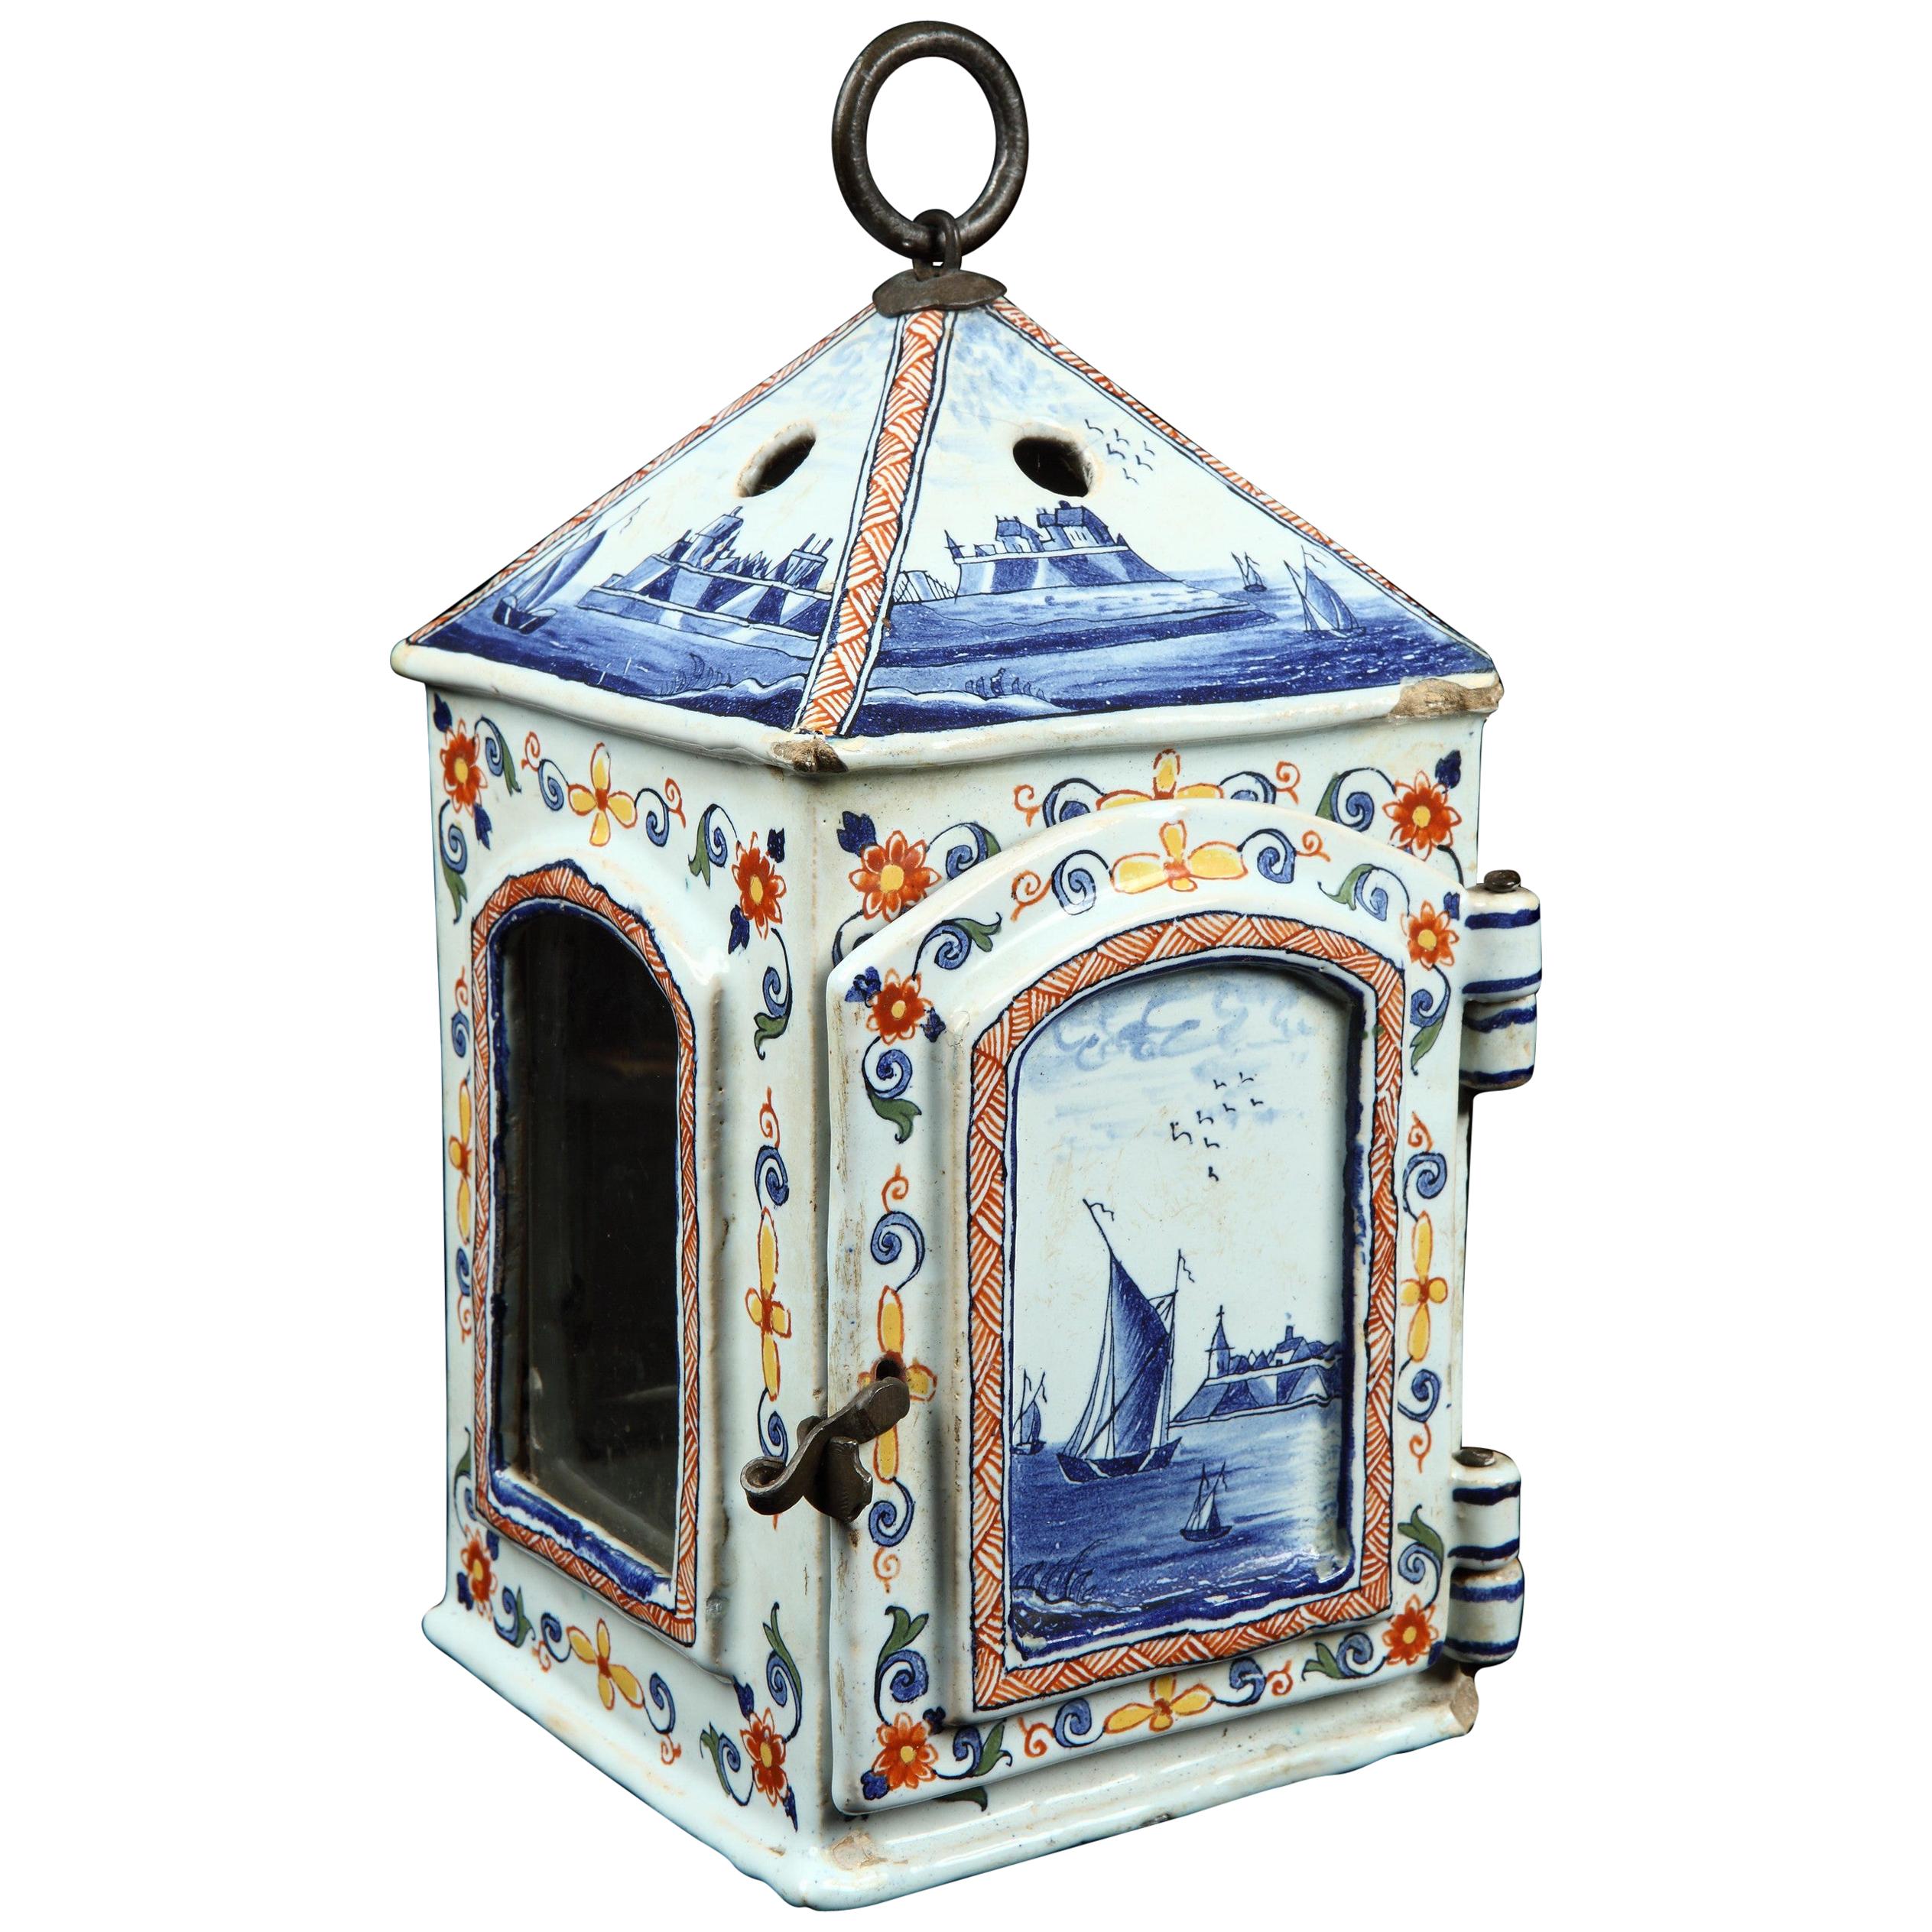 Lantern, Delftware, mid-18th Century, Dutch, Polychrome, Tryhoorn Collection